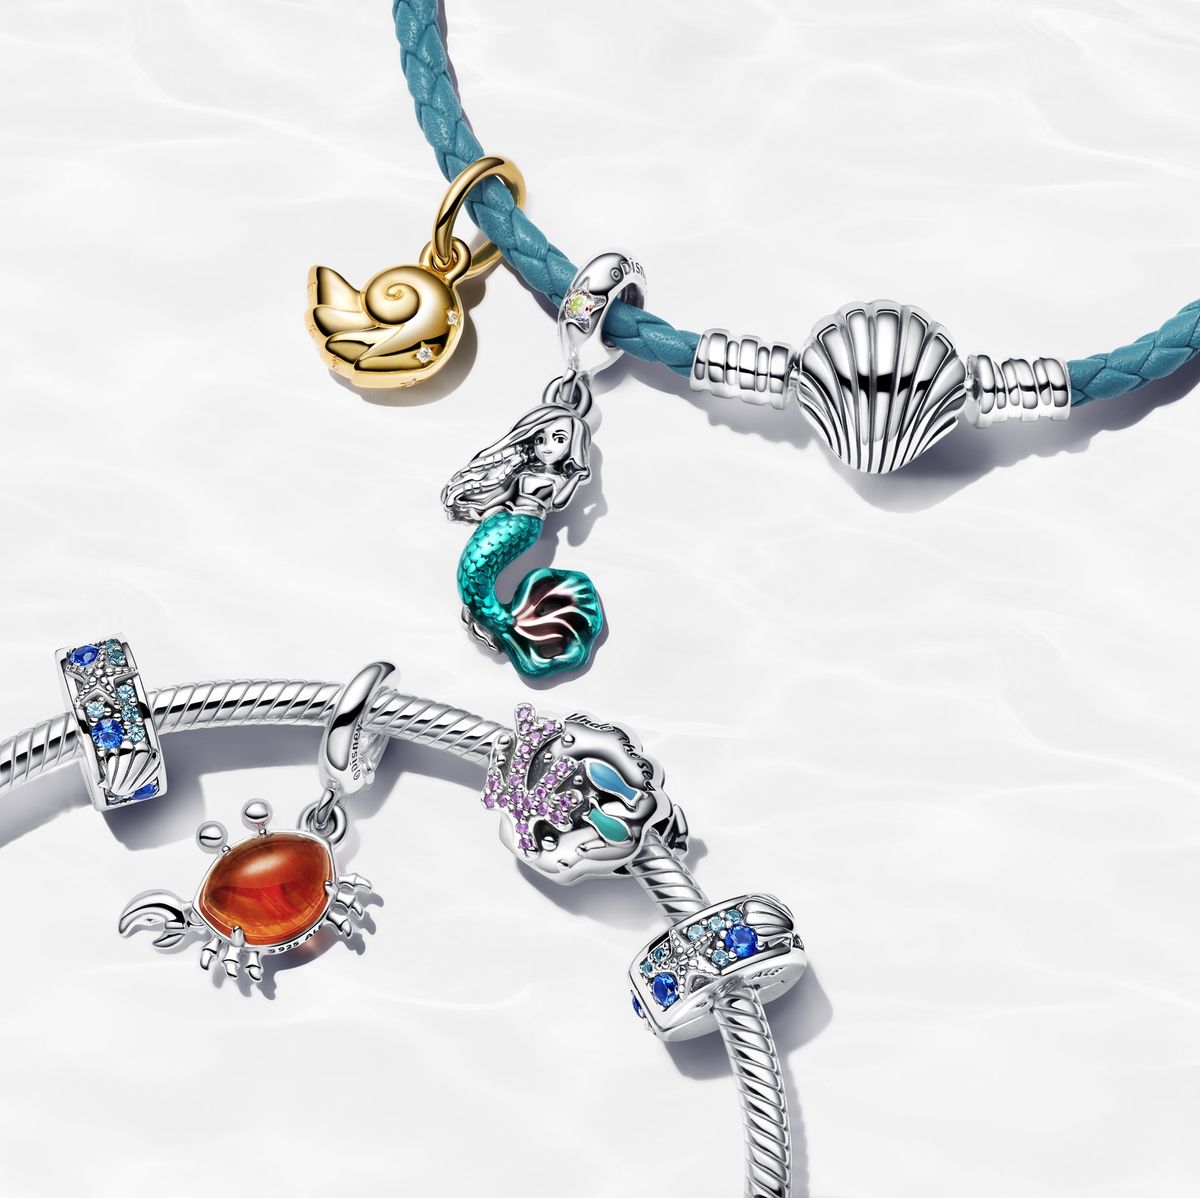 x 'The Little Mermaid' Collection Launch 2023